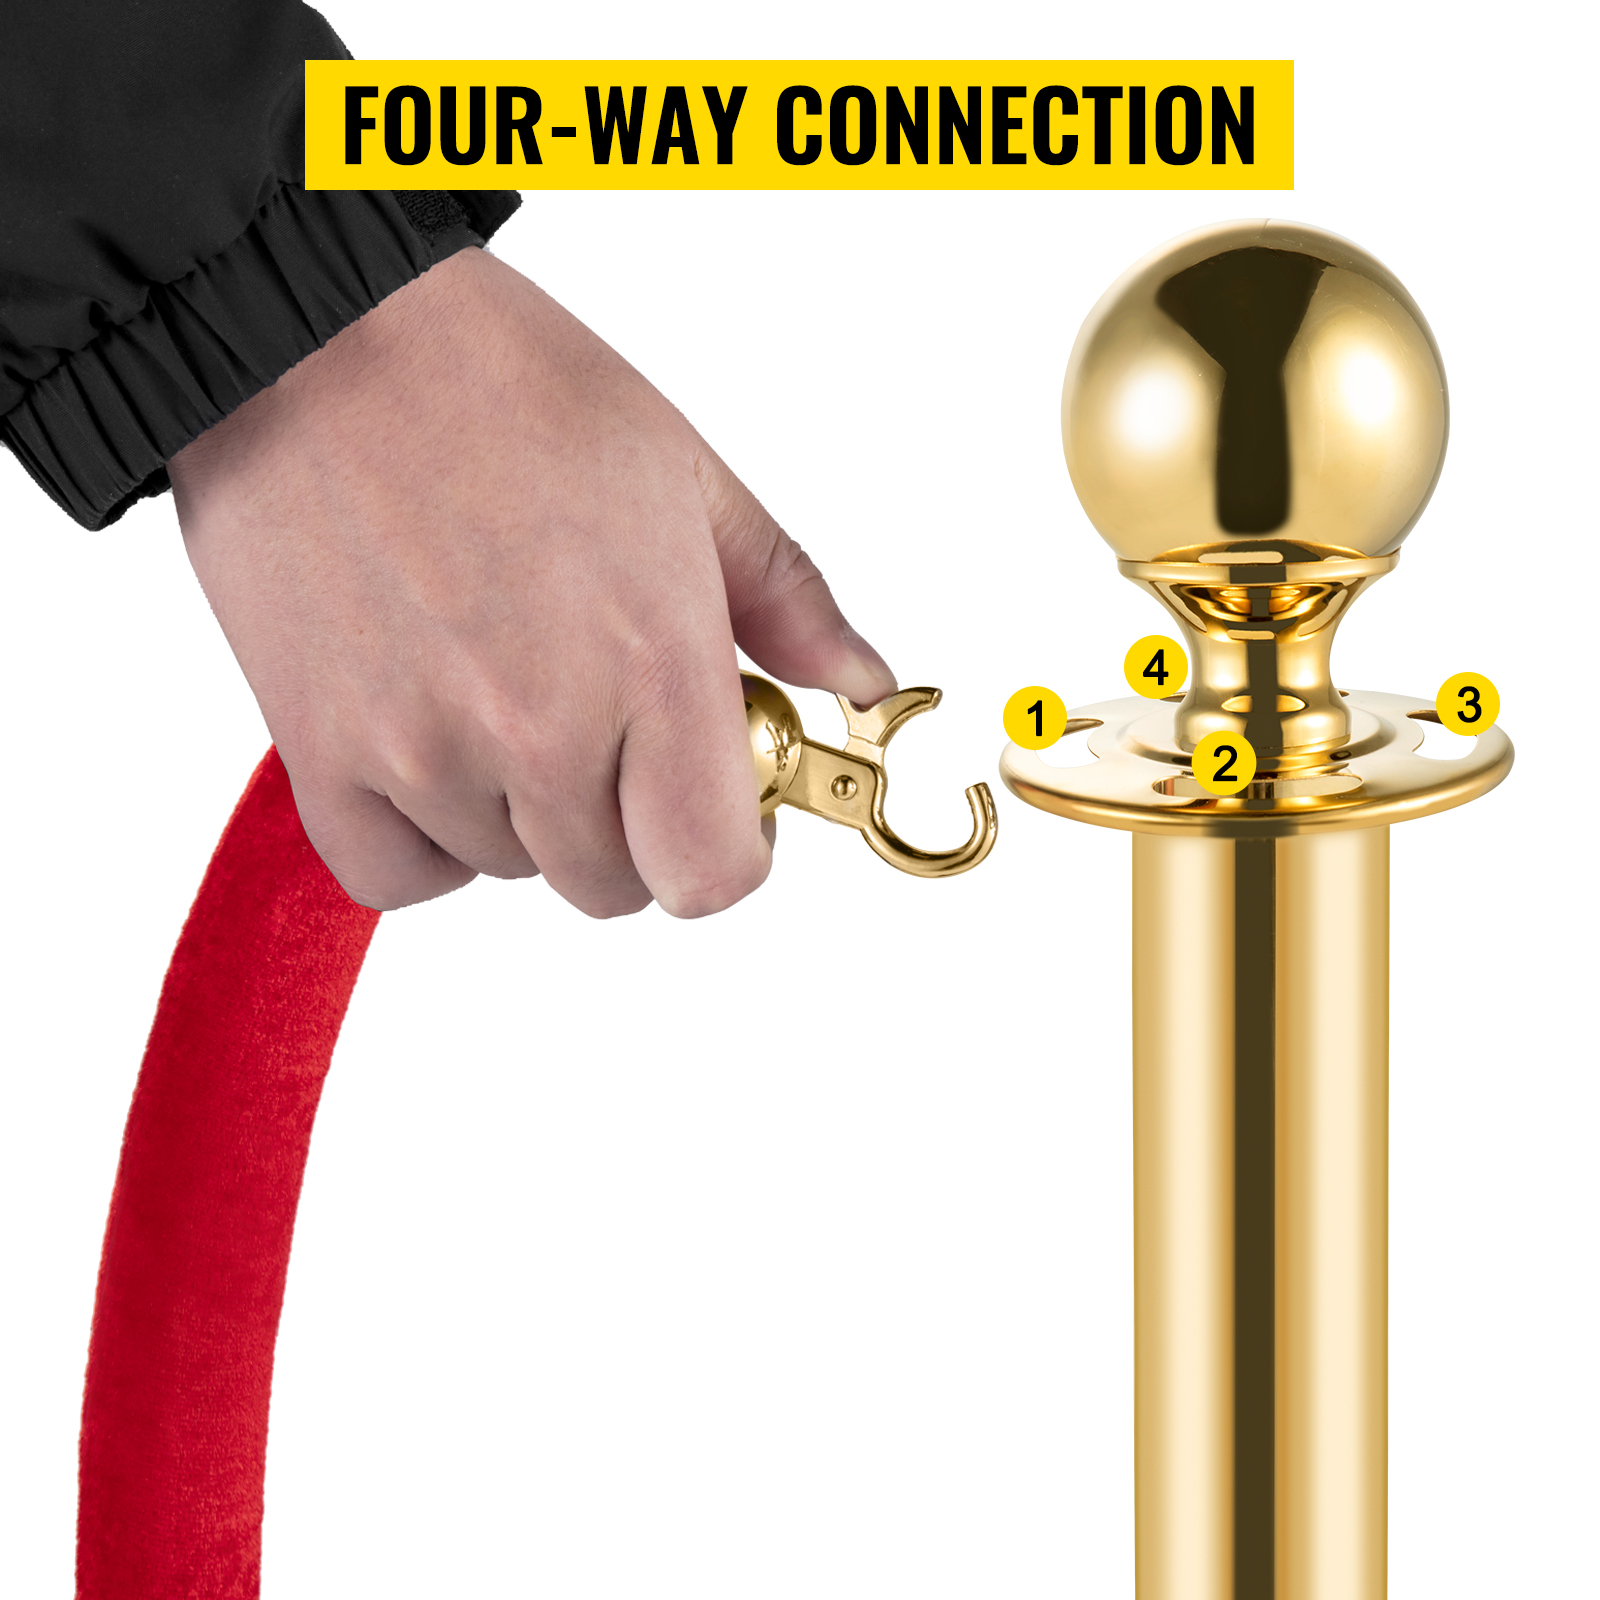 4pcs Red Velvet Rope Stanchion Gold Post Crowd Control Queue Line Barrier 3- rope